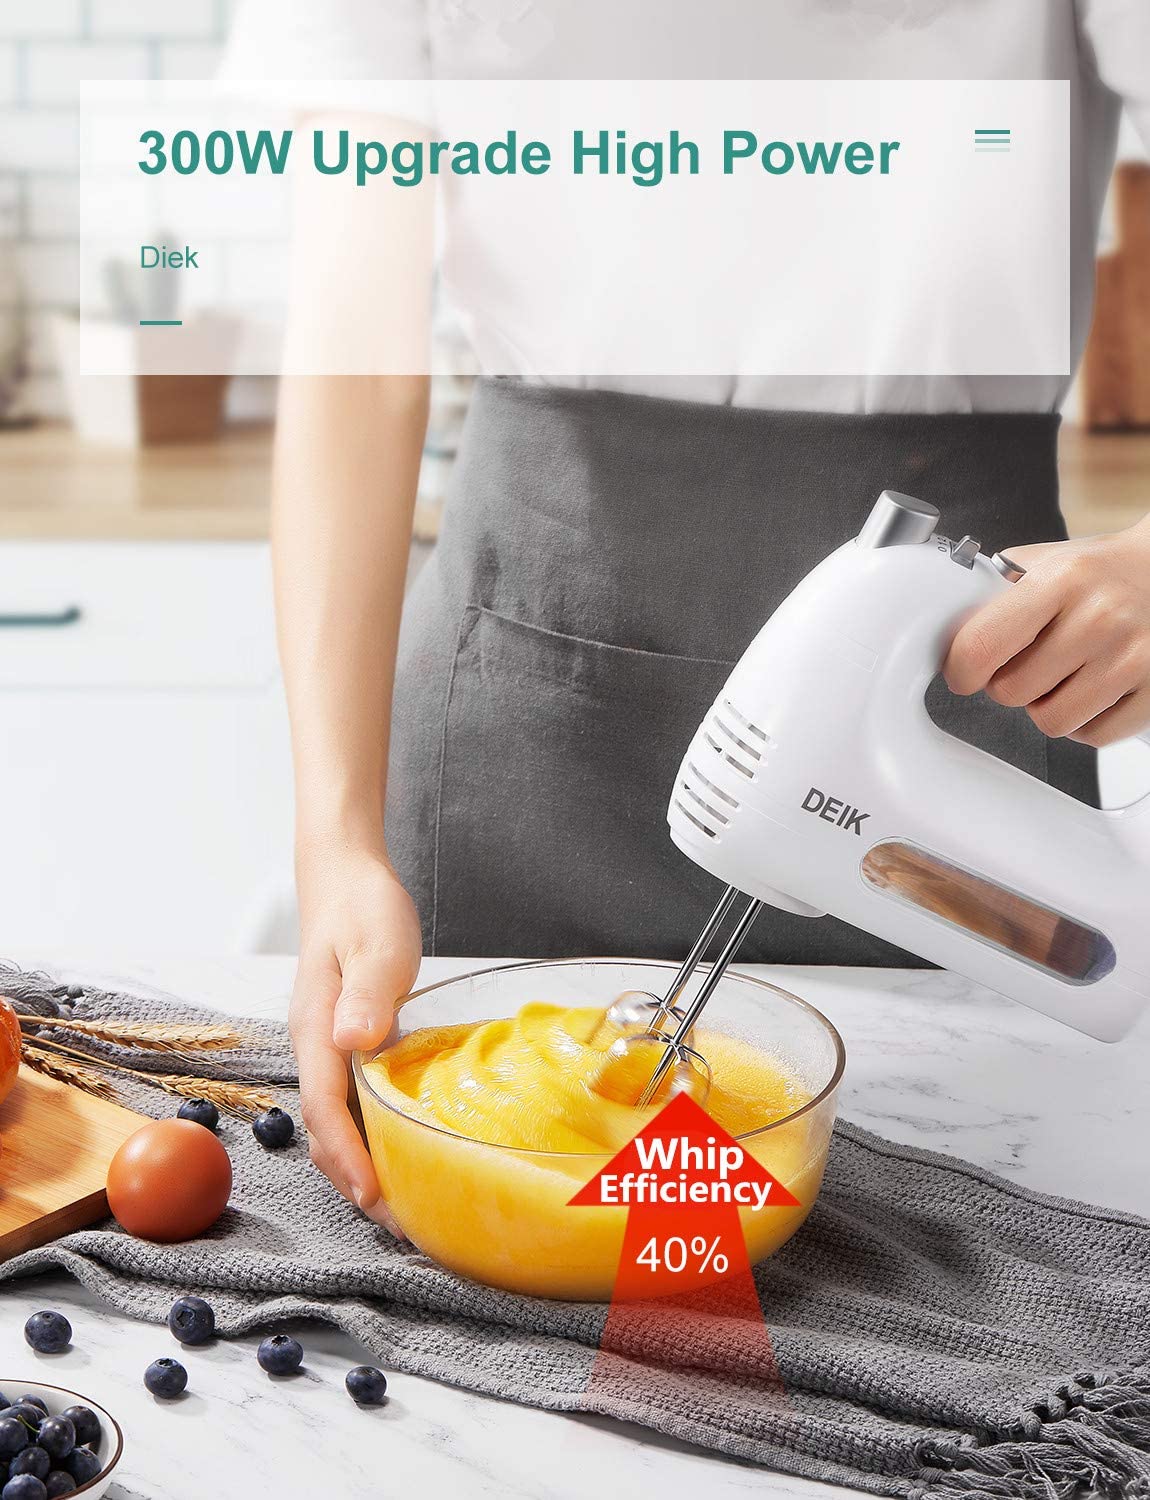 Deik Electric Hand Mixer,6-Speed 250W Hand Mixer Electric – Hand Held Mixer Includes 2 Stainless Steel Beaters and 2 Dough Hooks, Turbo Button, One Button Eject Design, 300w Upgrade High Power, White